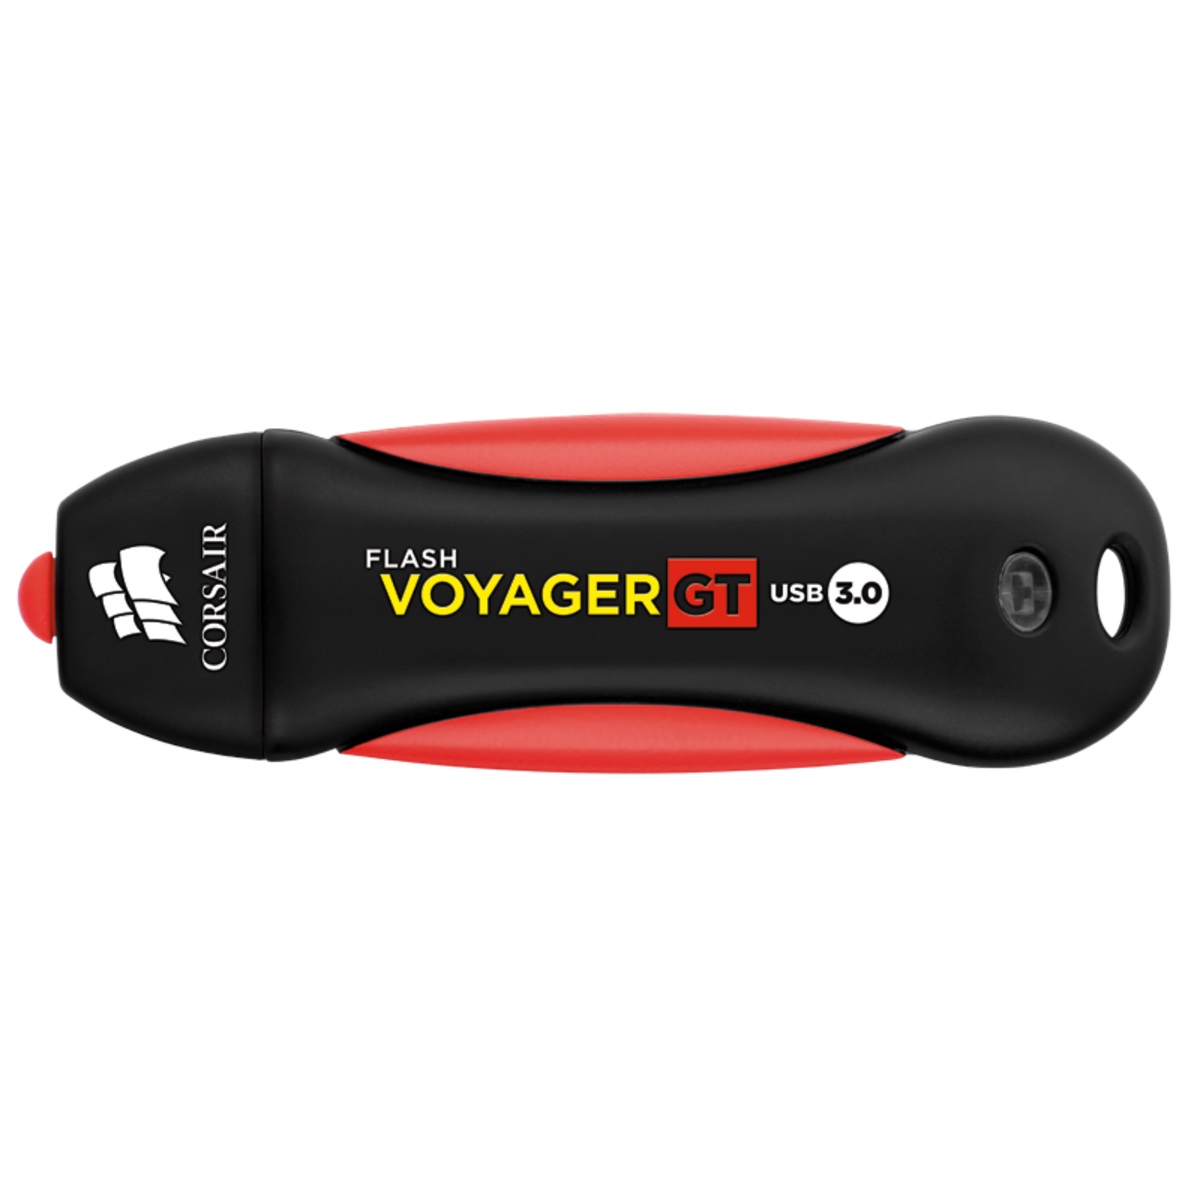 USB3.0 64GB Corsair Flash Voyager GT water-resistant all-rubber housin